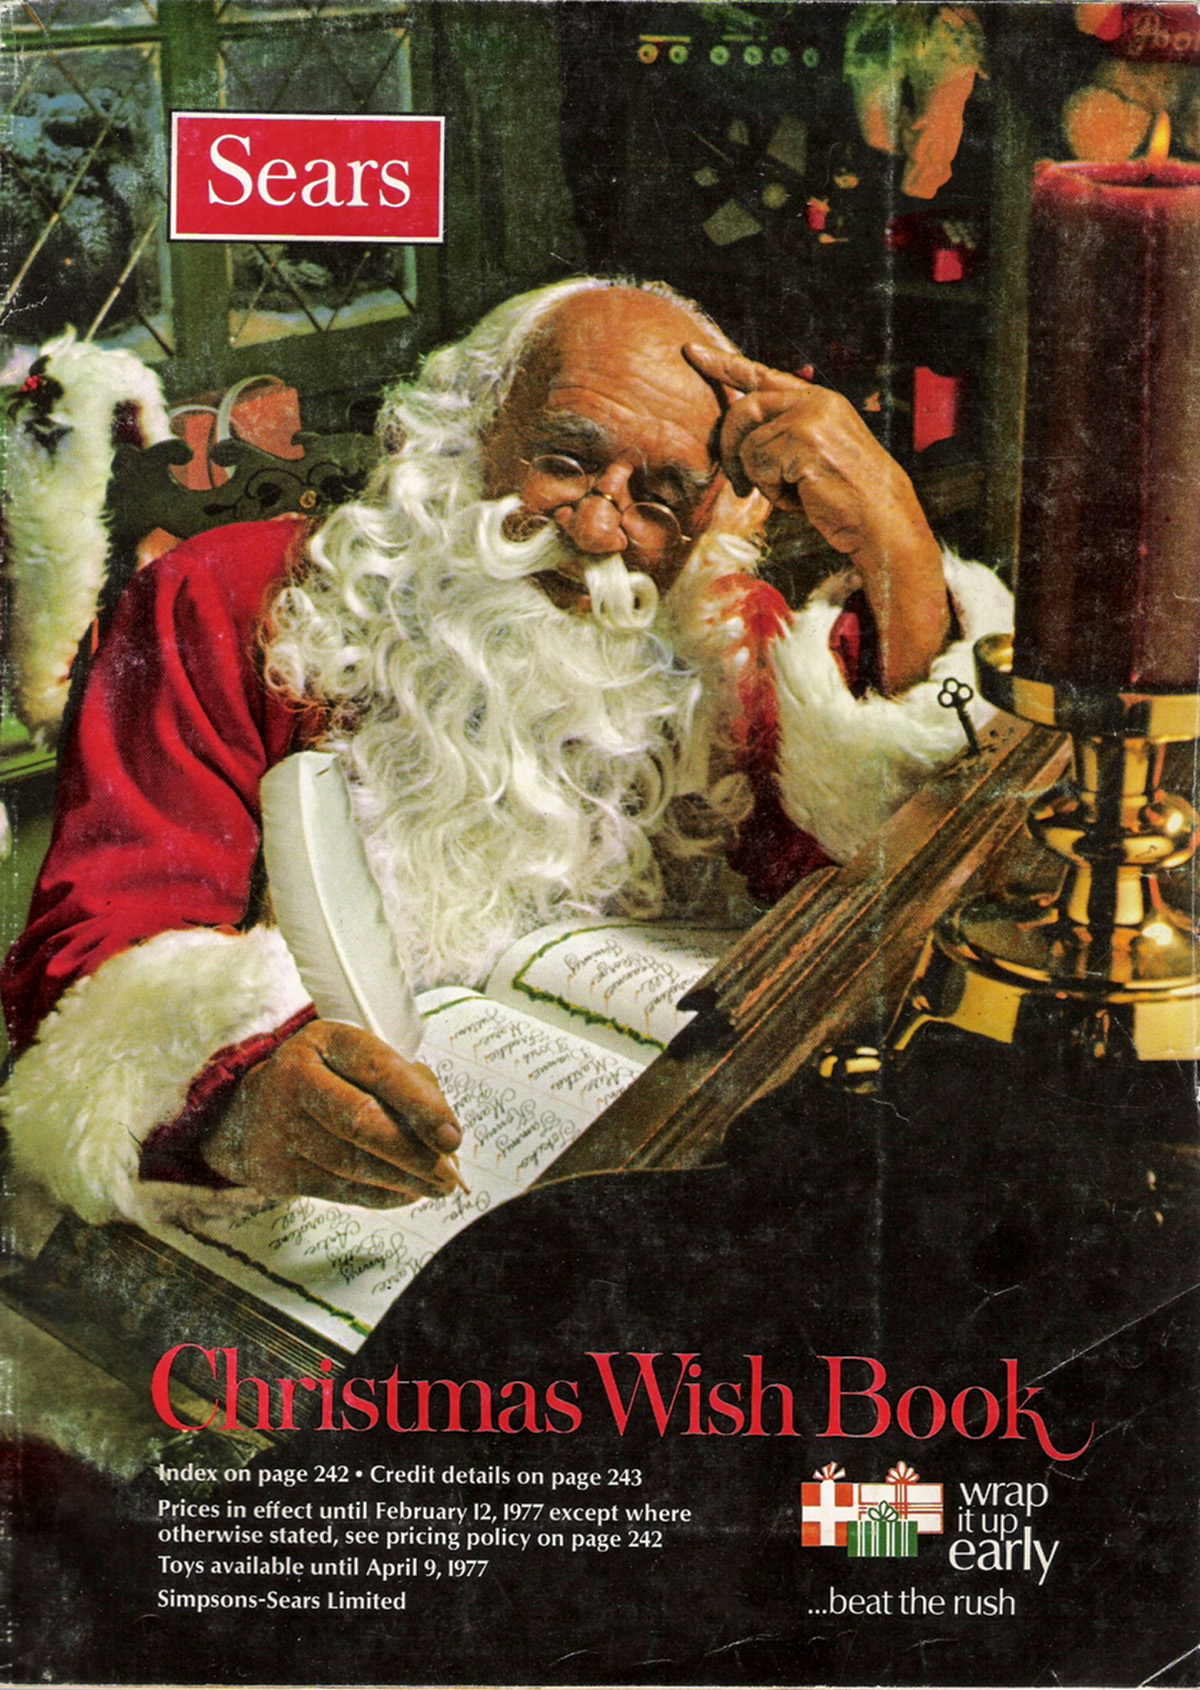 OPINION: Christmas catalogues once made for wishful thinking - The